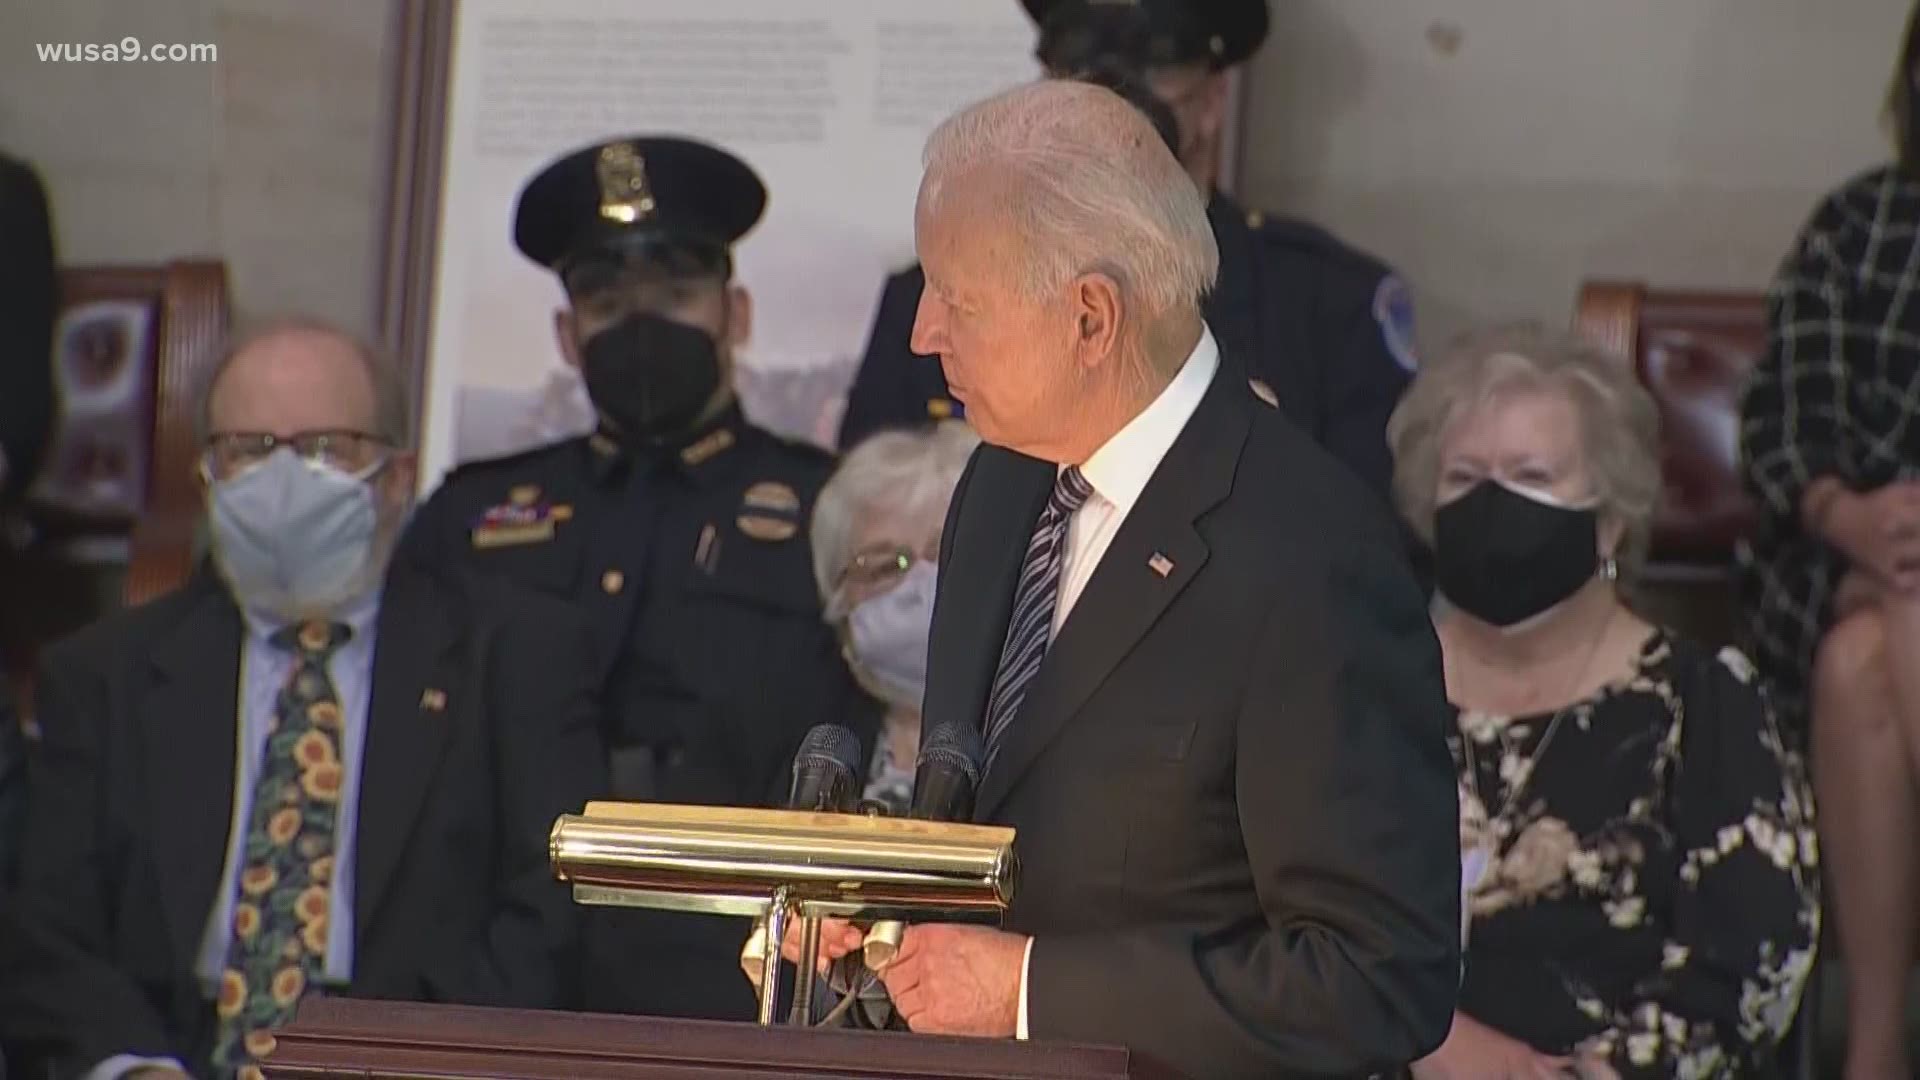 President Biden speaks as USCP Ofc. William "Billy" Evans becomes the 6th person, and 4th officer, to lie in honor at the Capitol Rotunda.